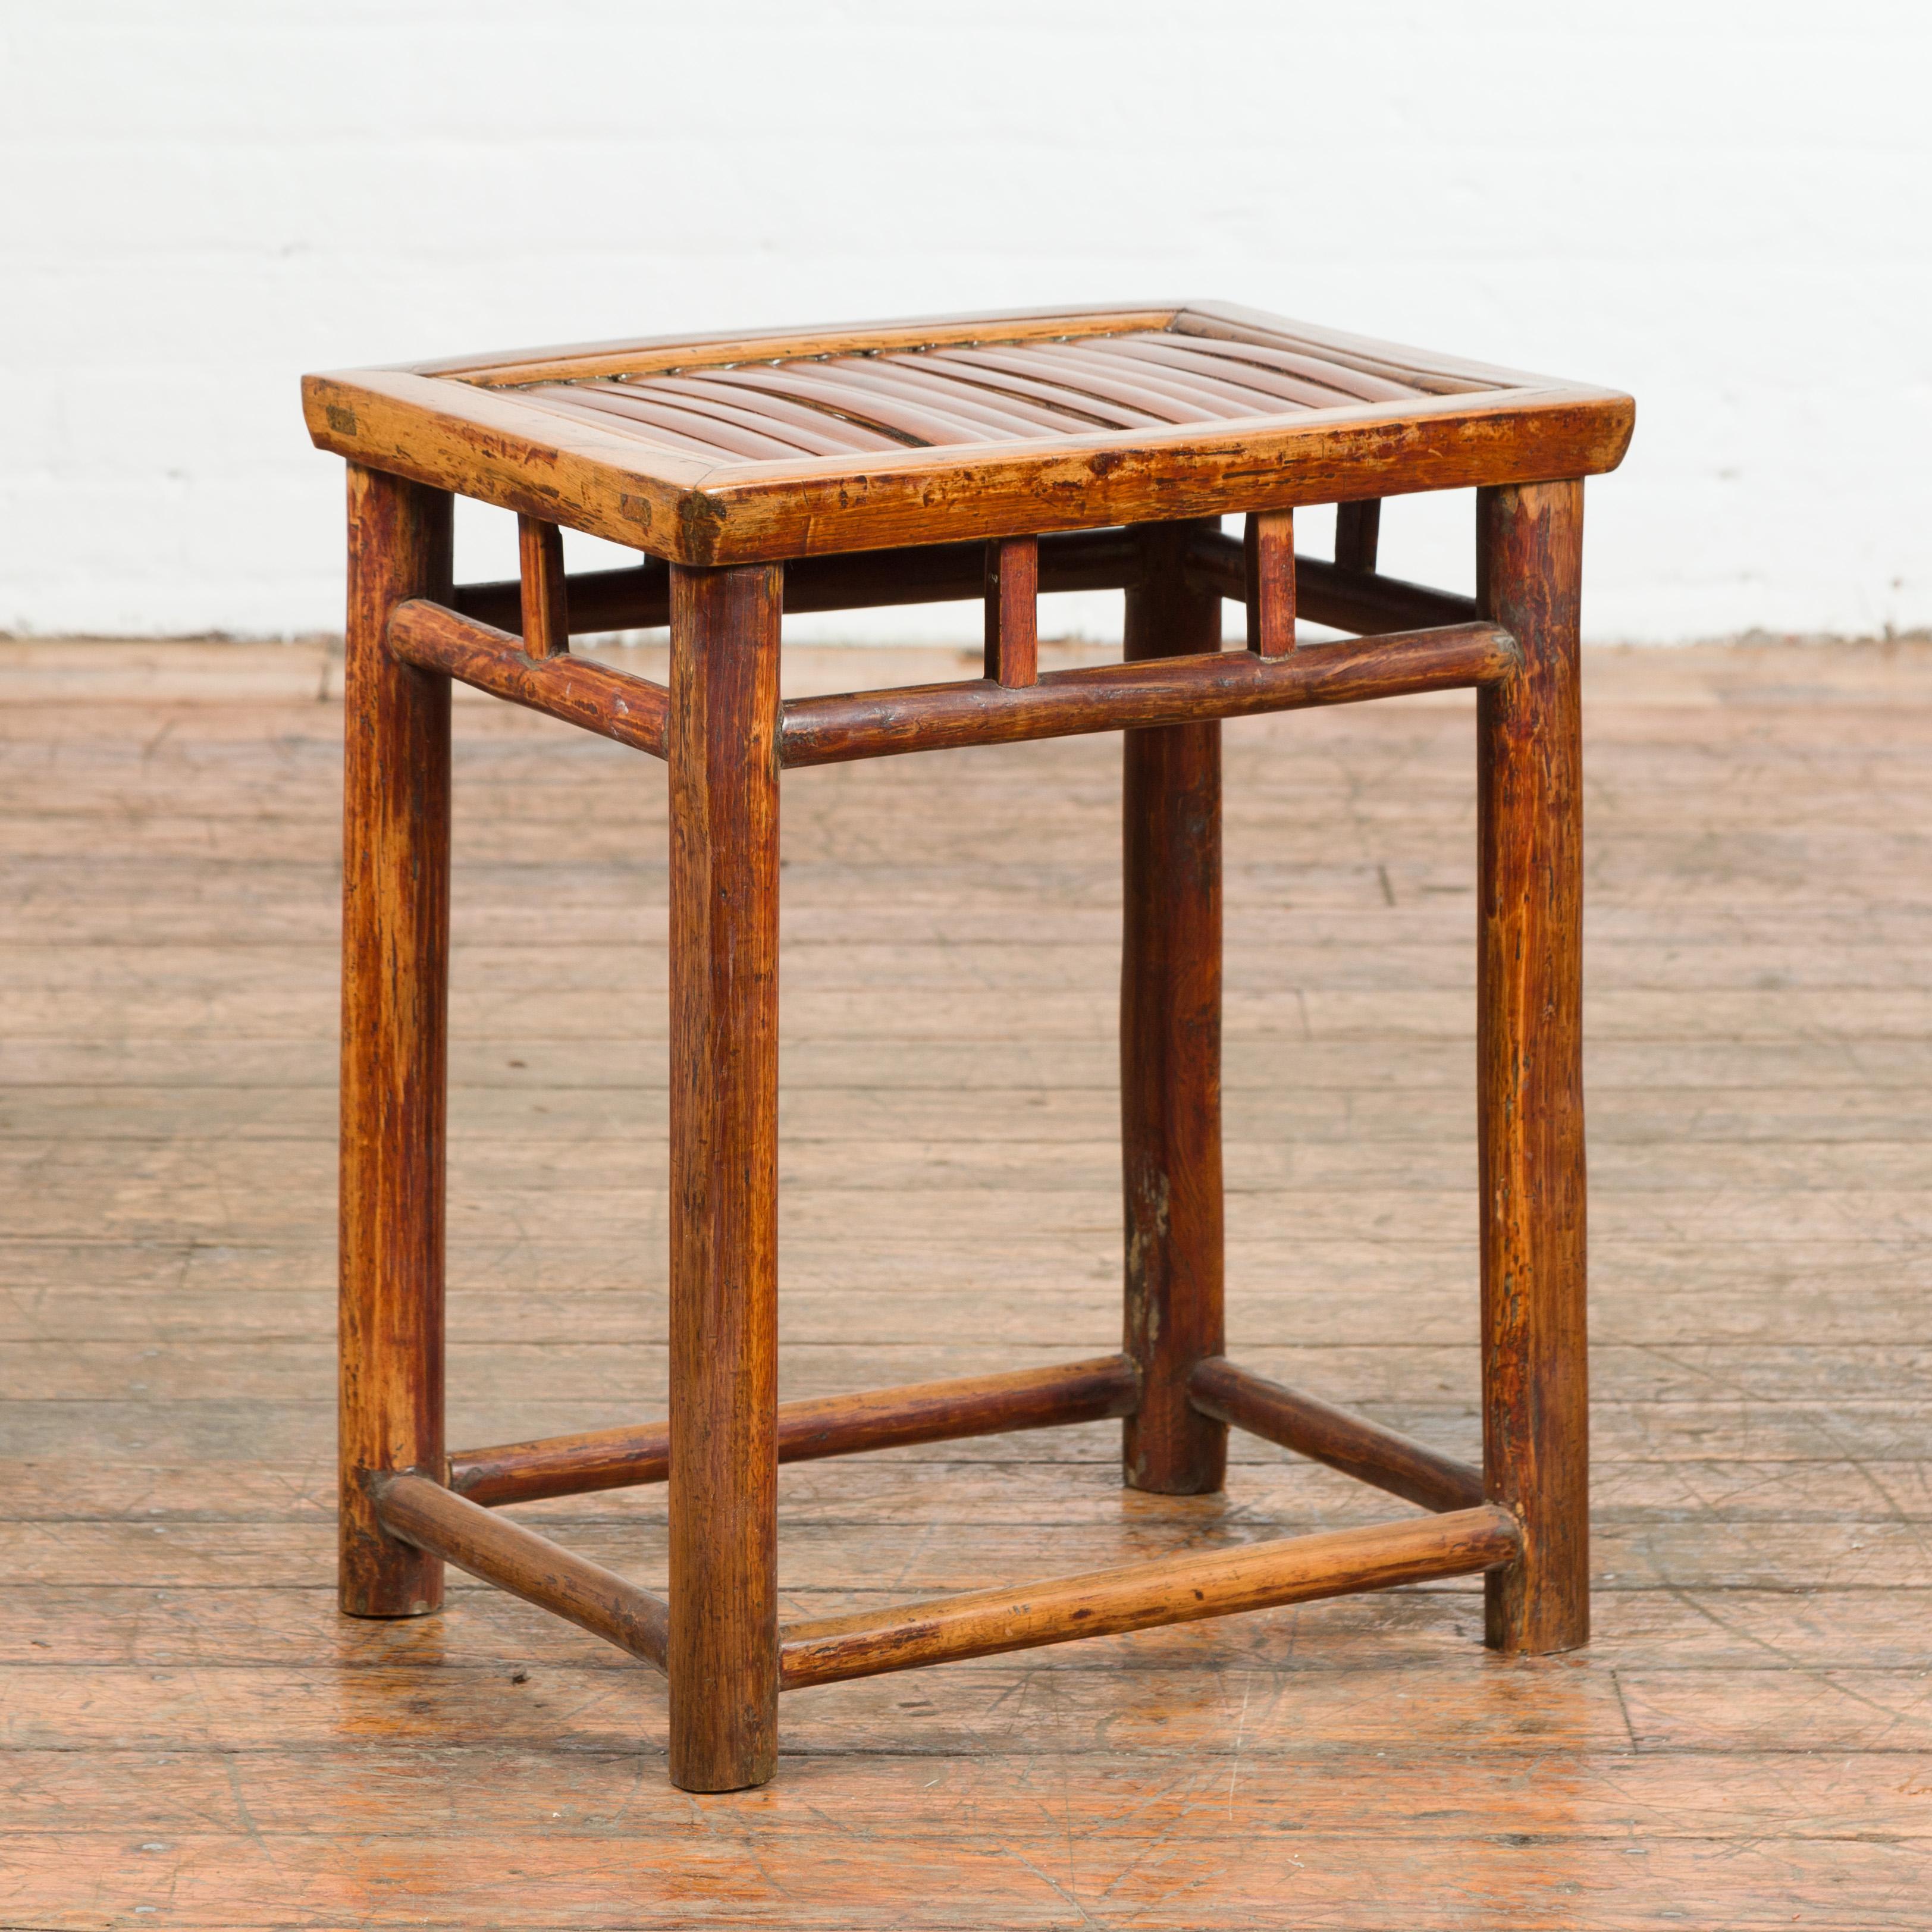 A Chinese antique Qing Dynasty side table from the 19th century, with split bamboo top and pillar strut motifs. Created in China during the Qing Dynasty, this unusual side table features a rectangular top made of split bamboo, resting above an open